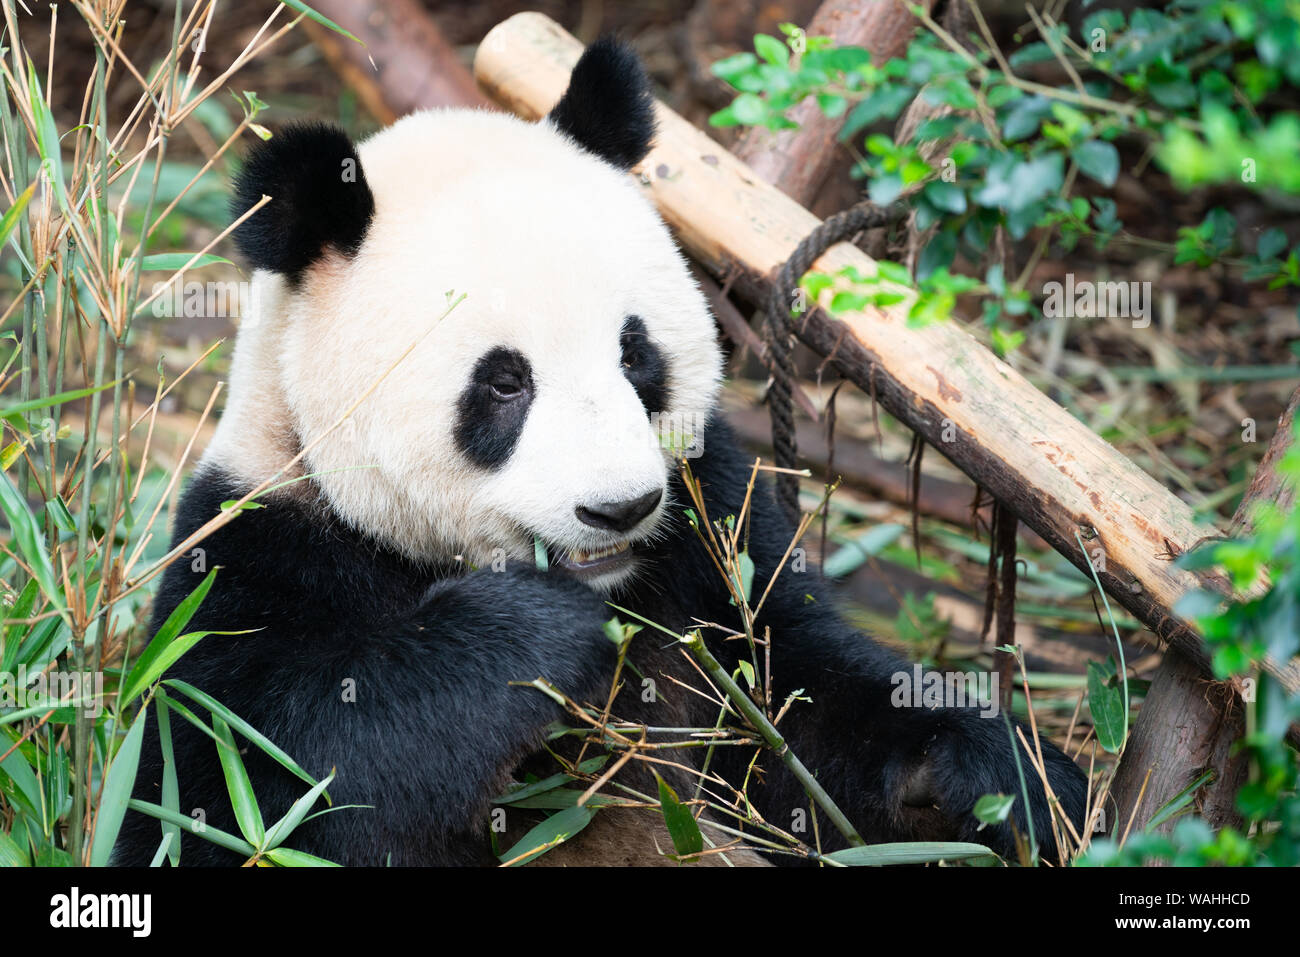 Portait of a Giant Panda eating bamboo leaves in Chengdu Sichuan China Stock Photo